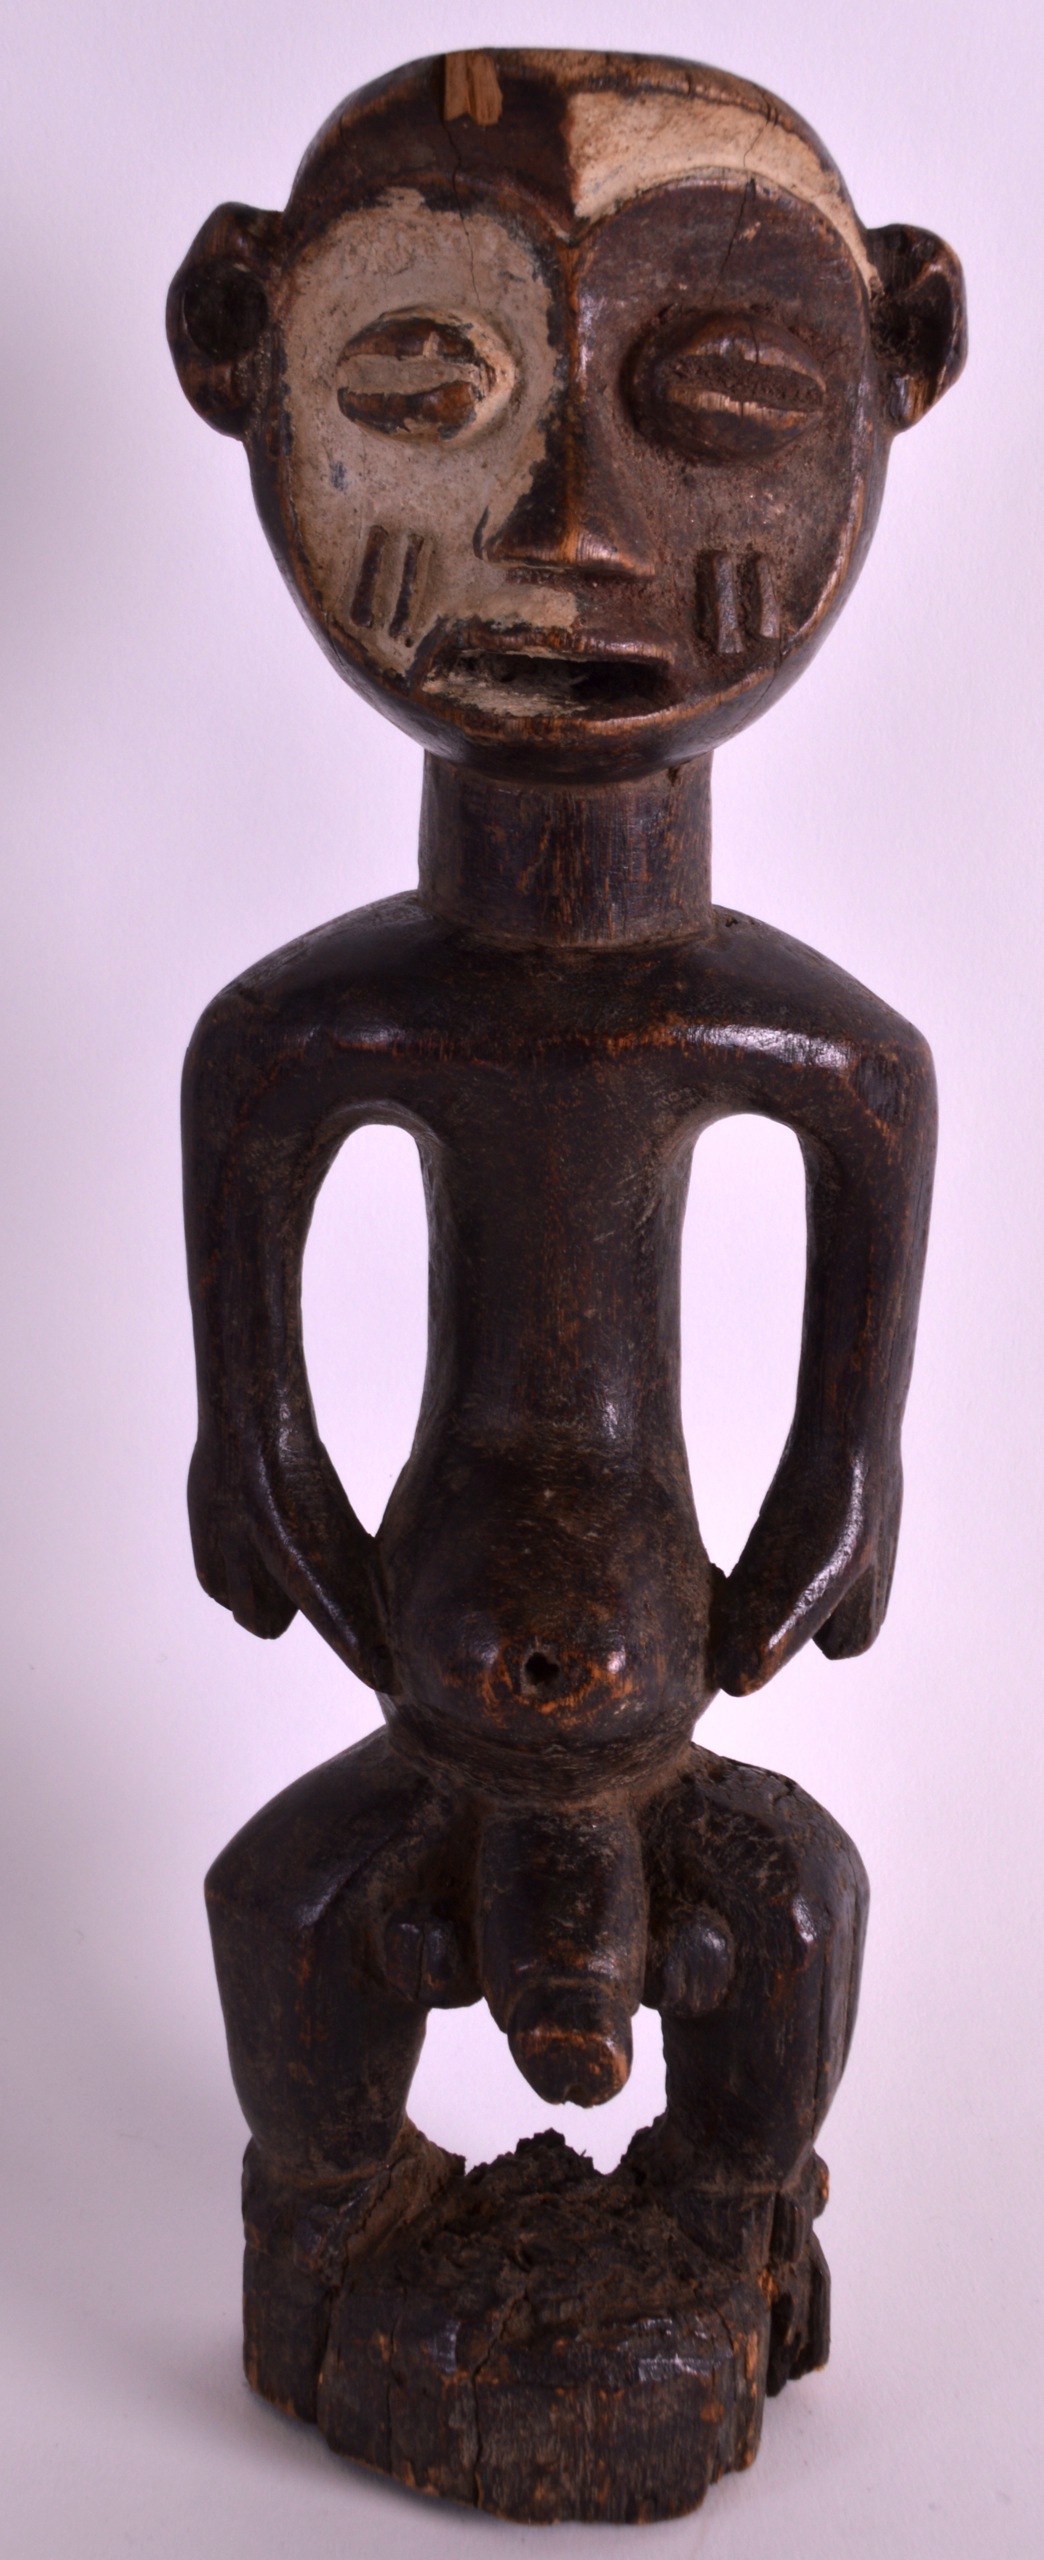 AN EARLY 20TH CENTURY AFRICAN CARVED HARDWOOD FERTILITY FIGURE modelled with exposed genitalia.